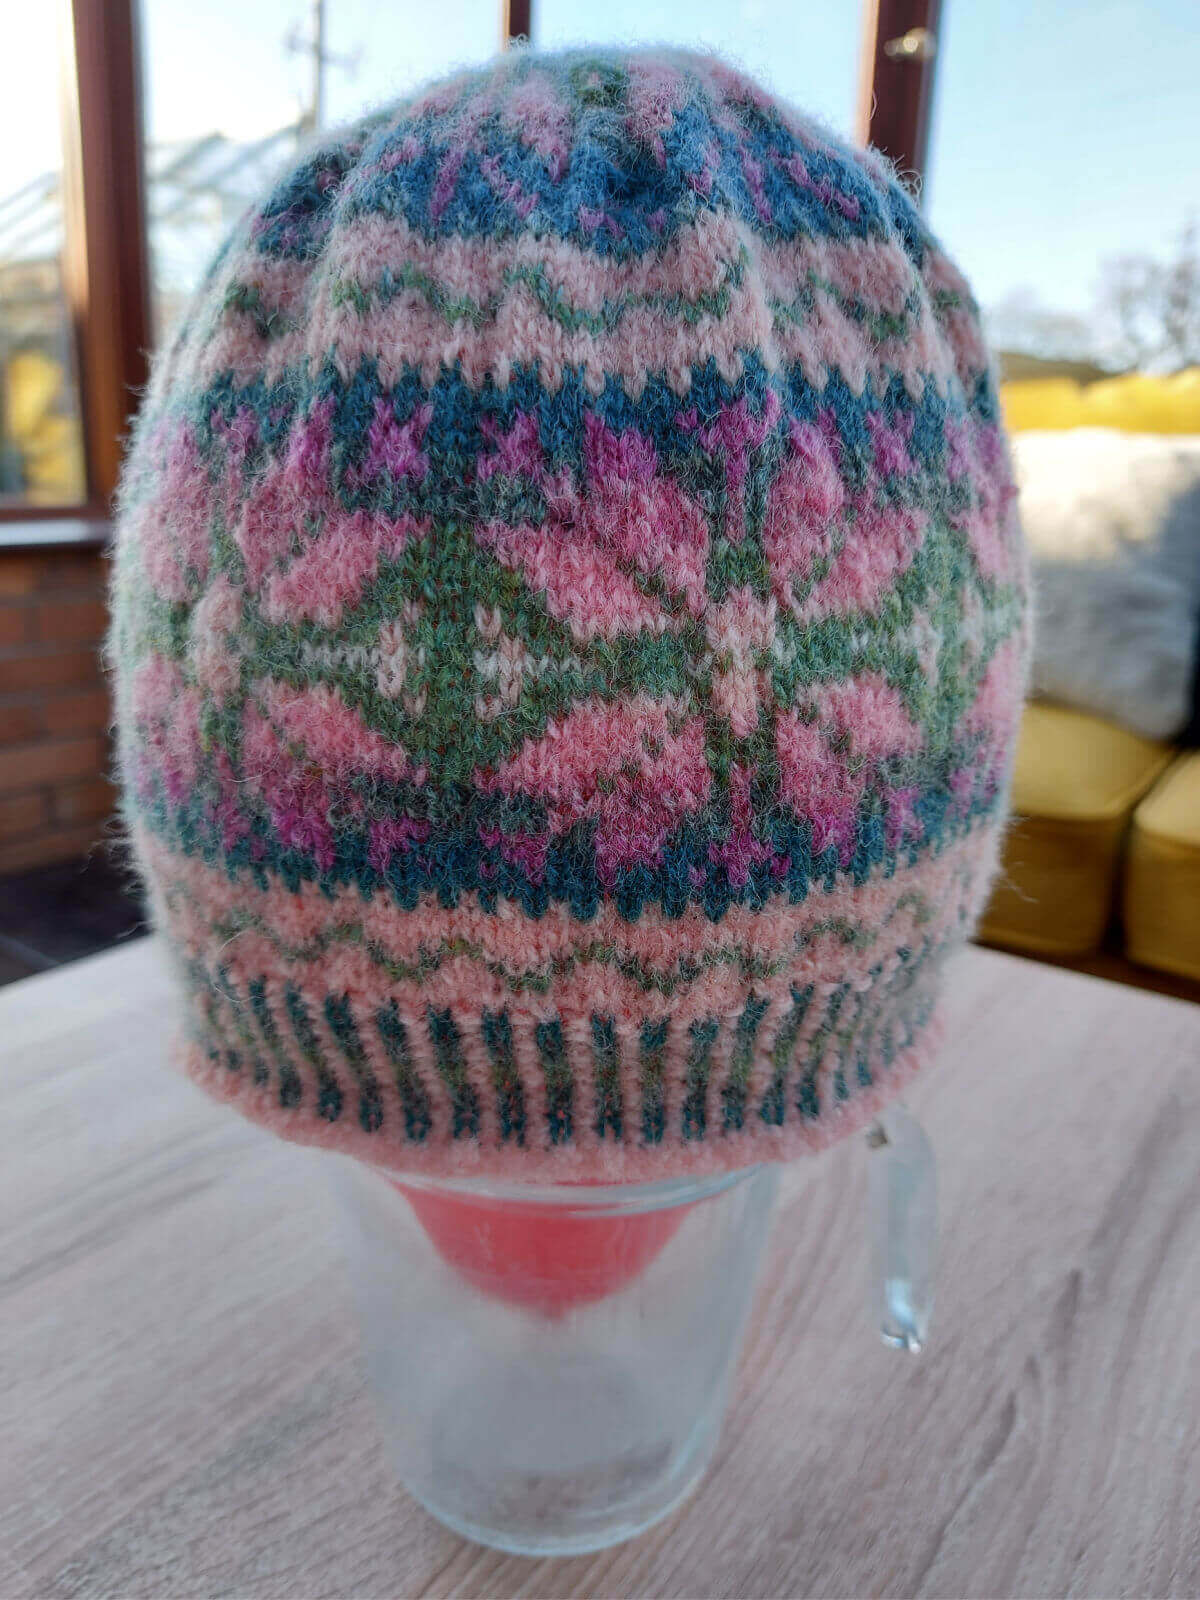 A knitted colourwork hat is drying on a red balloon balance in a glass jug. The jug is standing on a wooden table